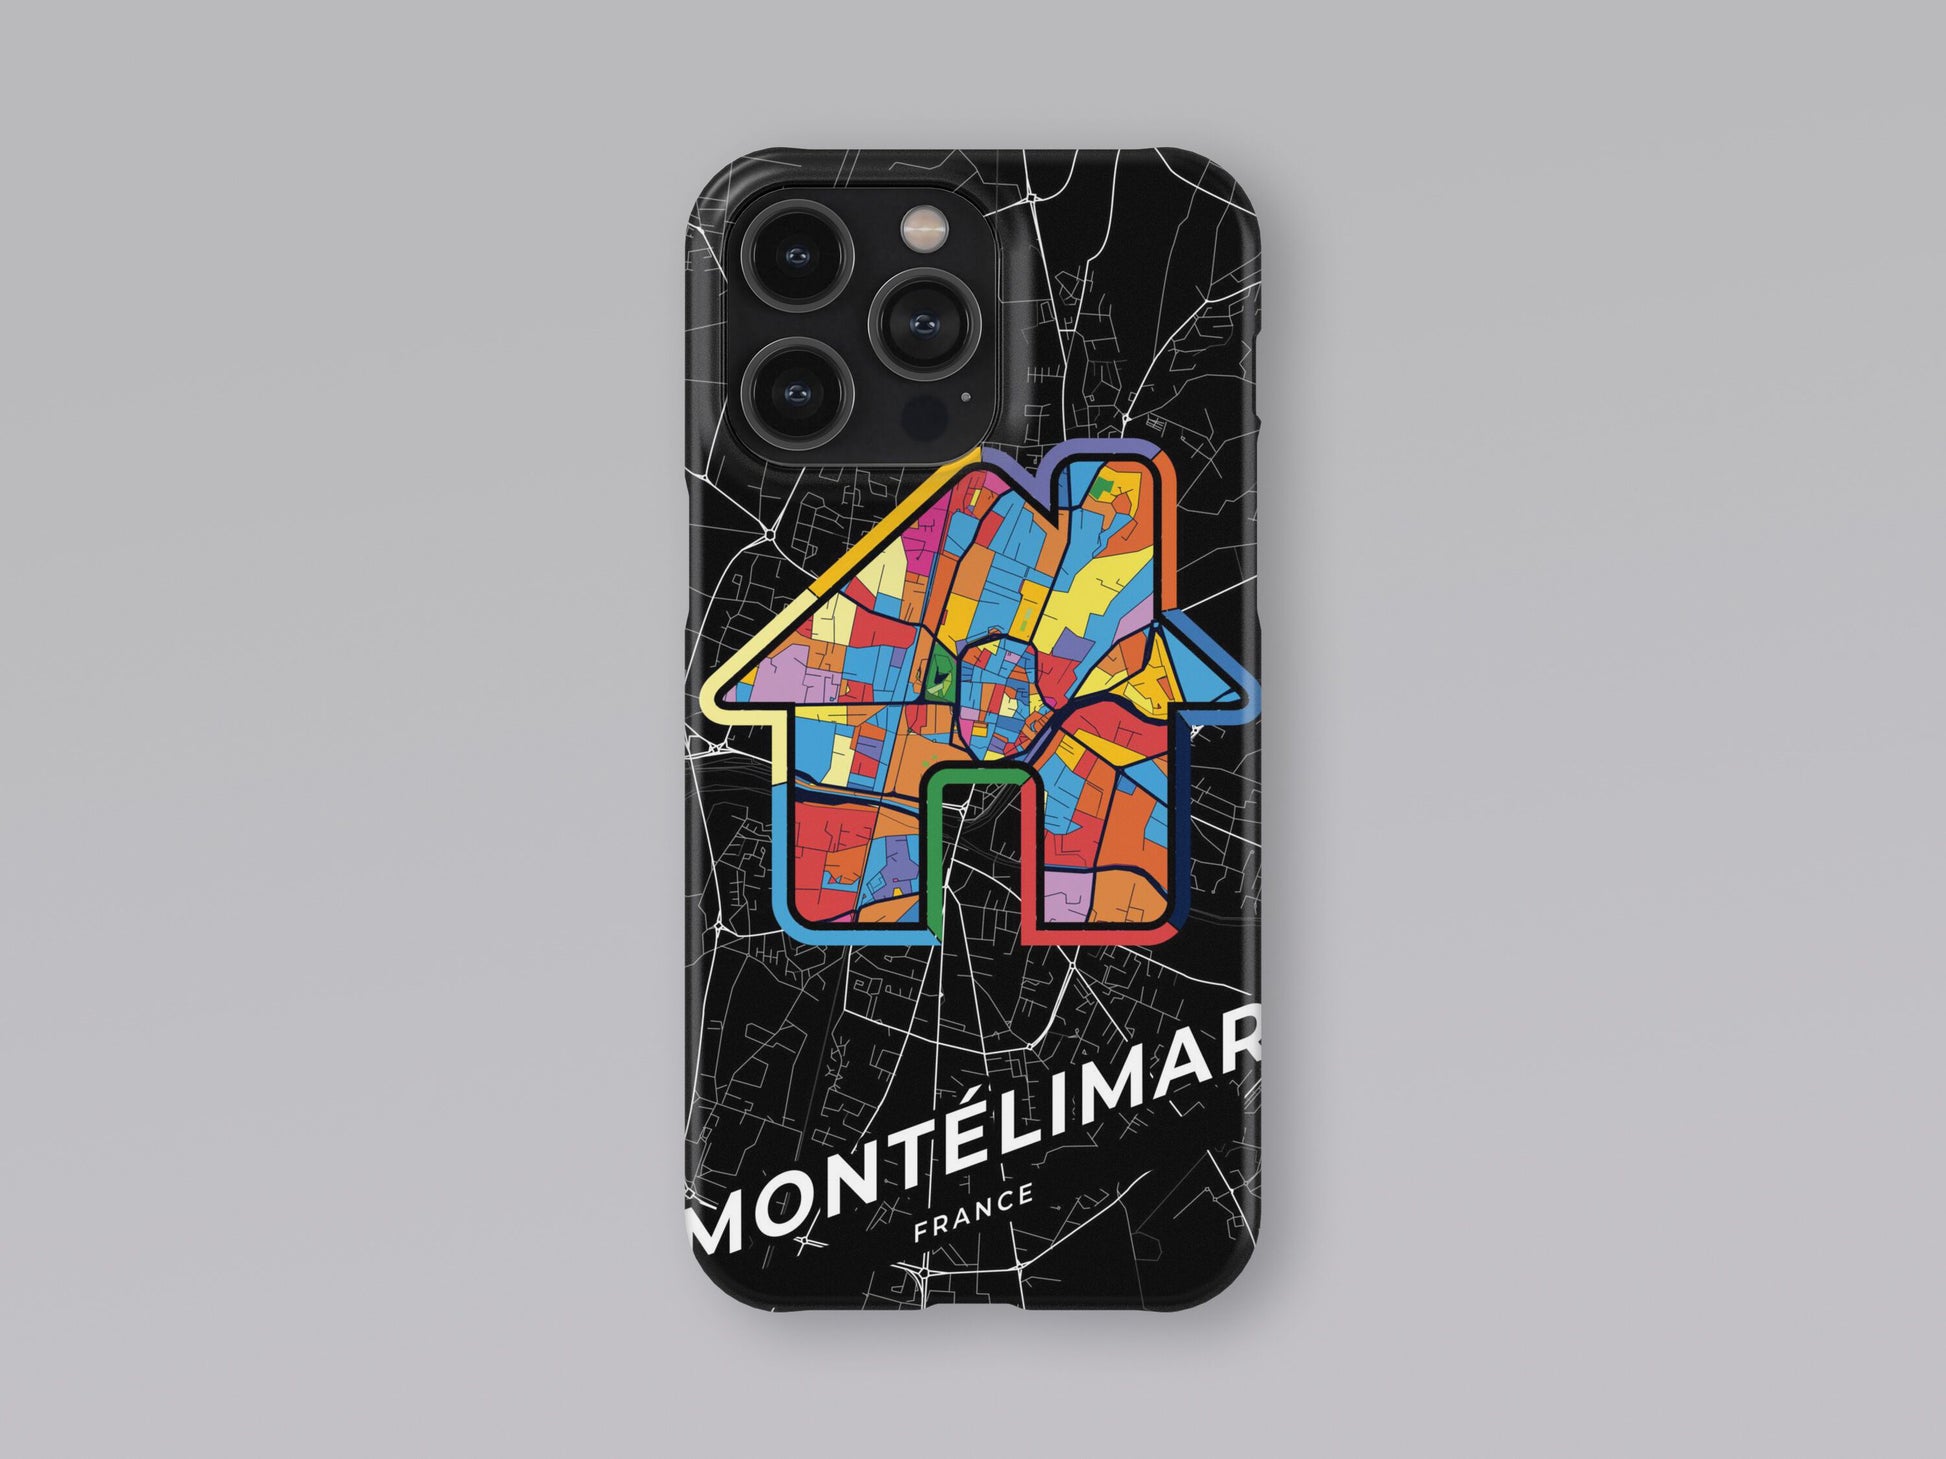 Montélimar France slim phone case with colorful icon. Birthday, wedding or housewarming gift. Couple match cases. 3